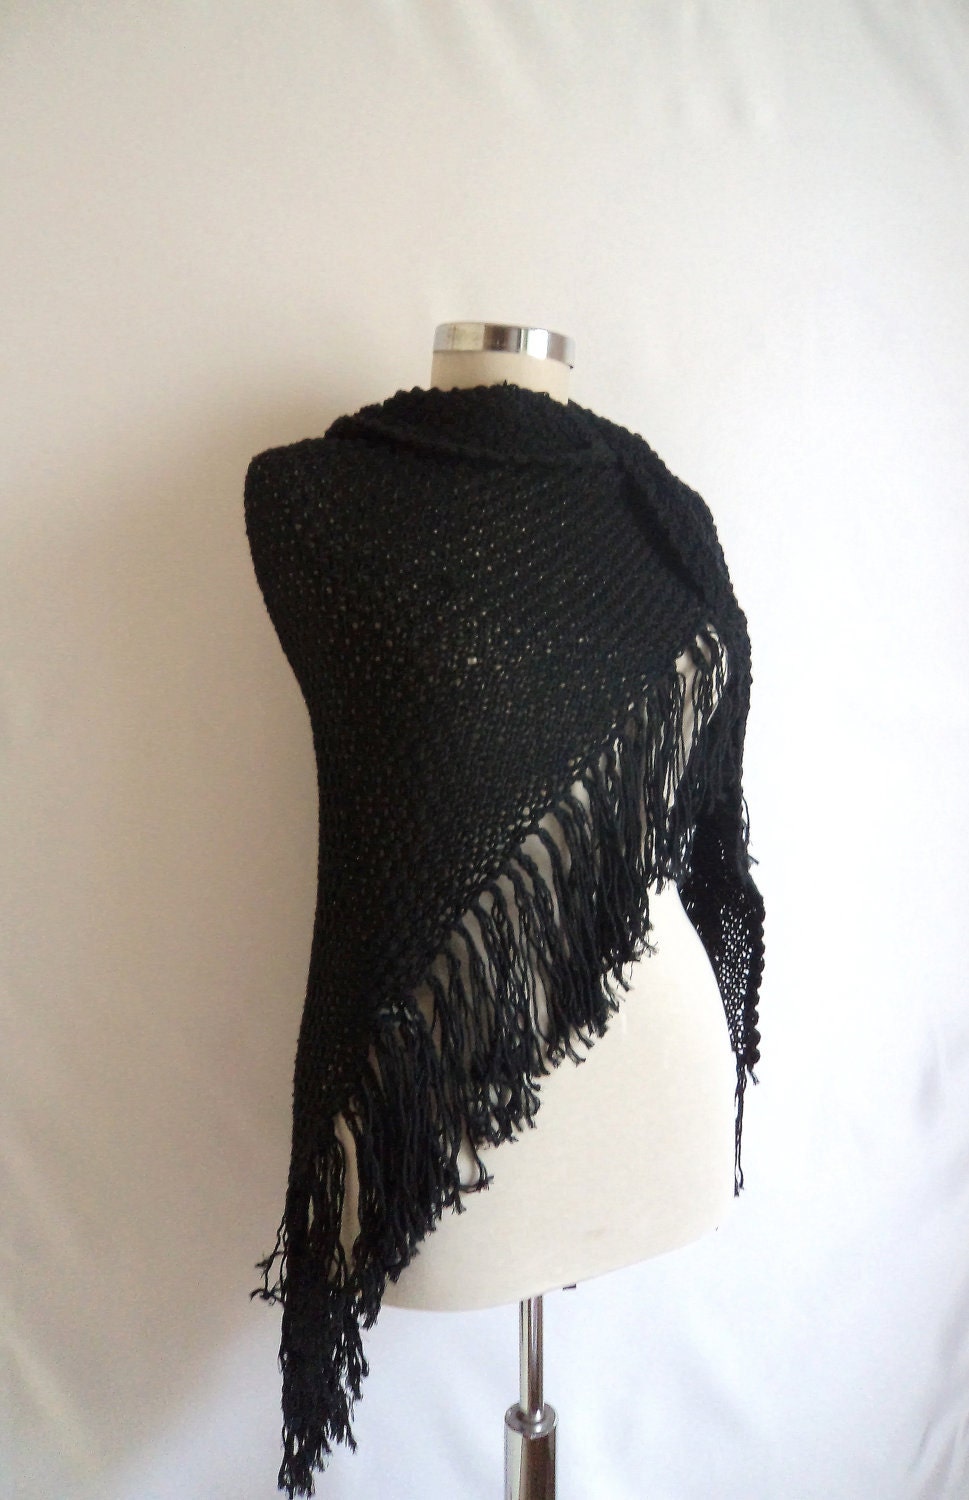 Shawl,Black,Shawl ,Wrap ,(mercerized wool) stole ,capelet ,lacework ,gift for her winter, collar,wrap,stole,collar,cowl,winter,gift